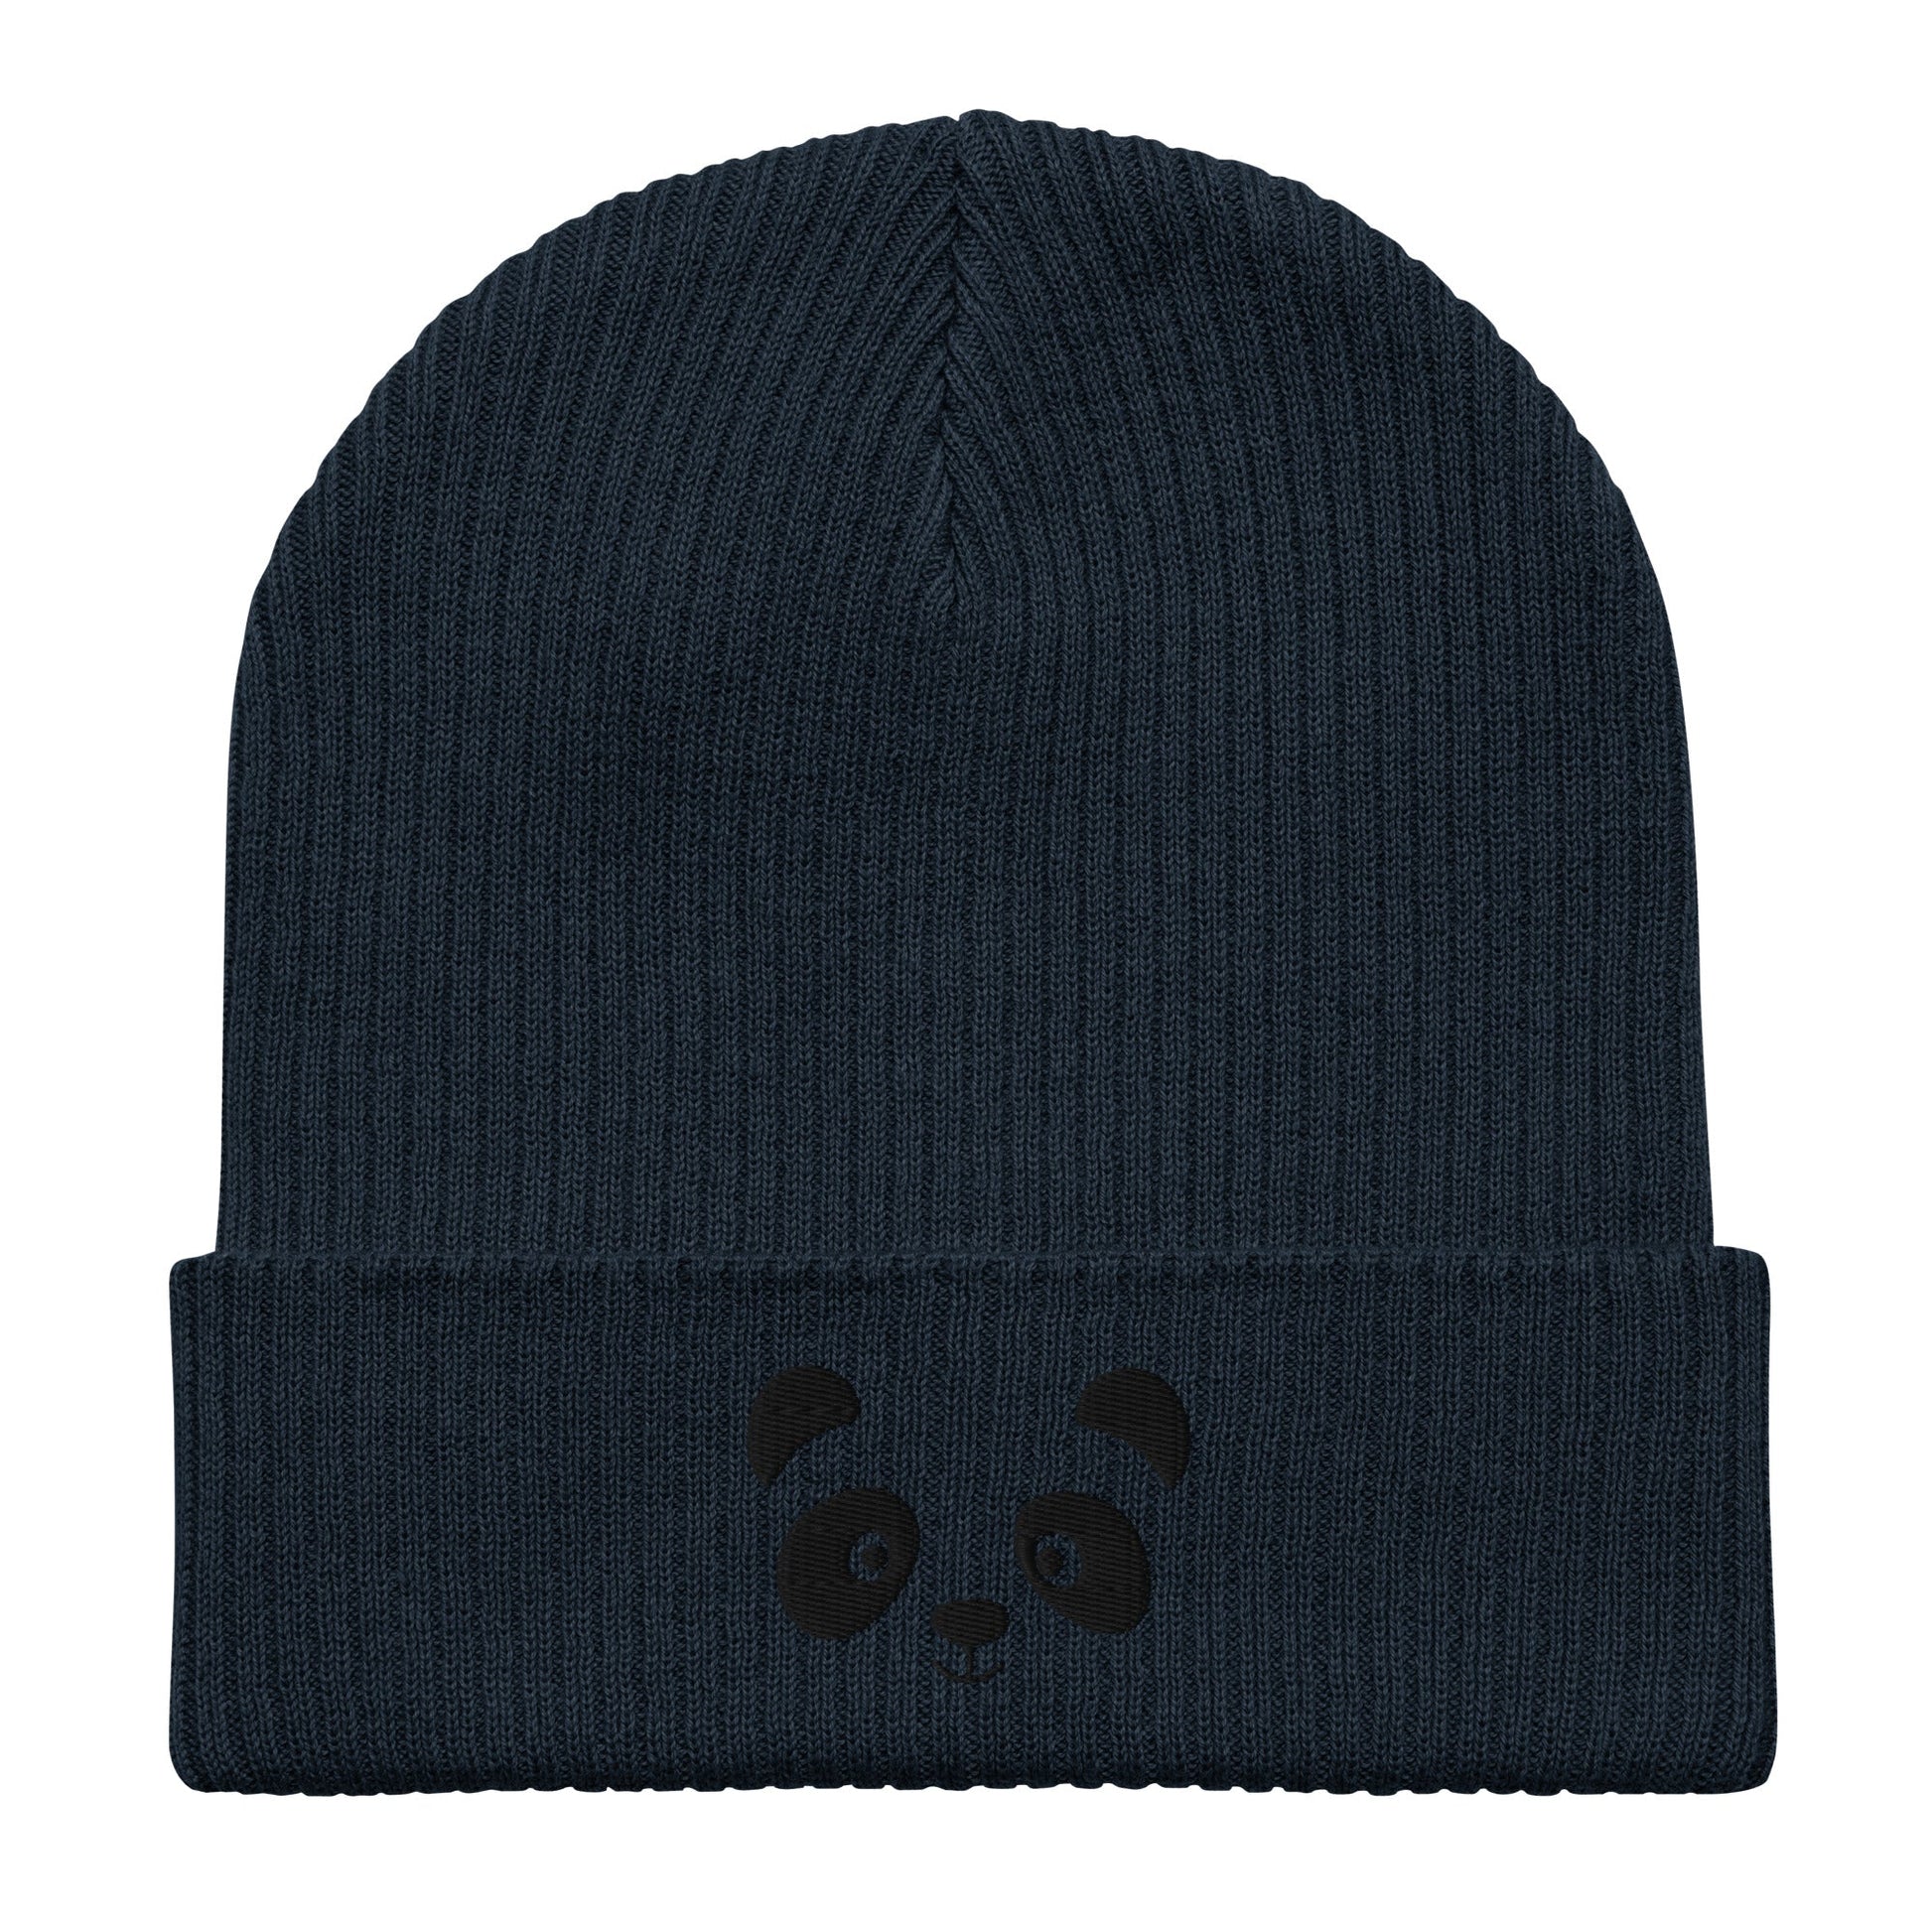 Panda face black embroidered, organic cotton ribbed beanie-42